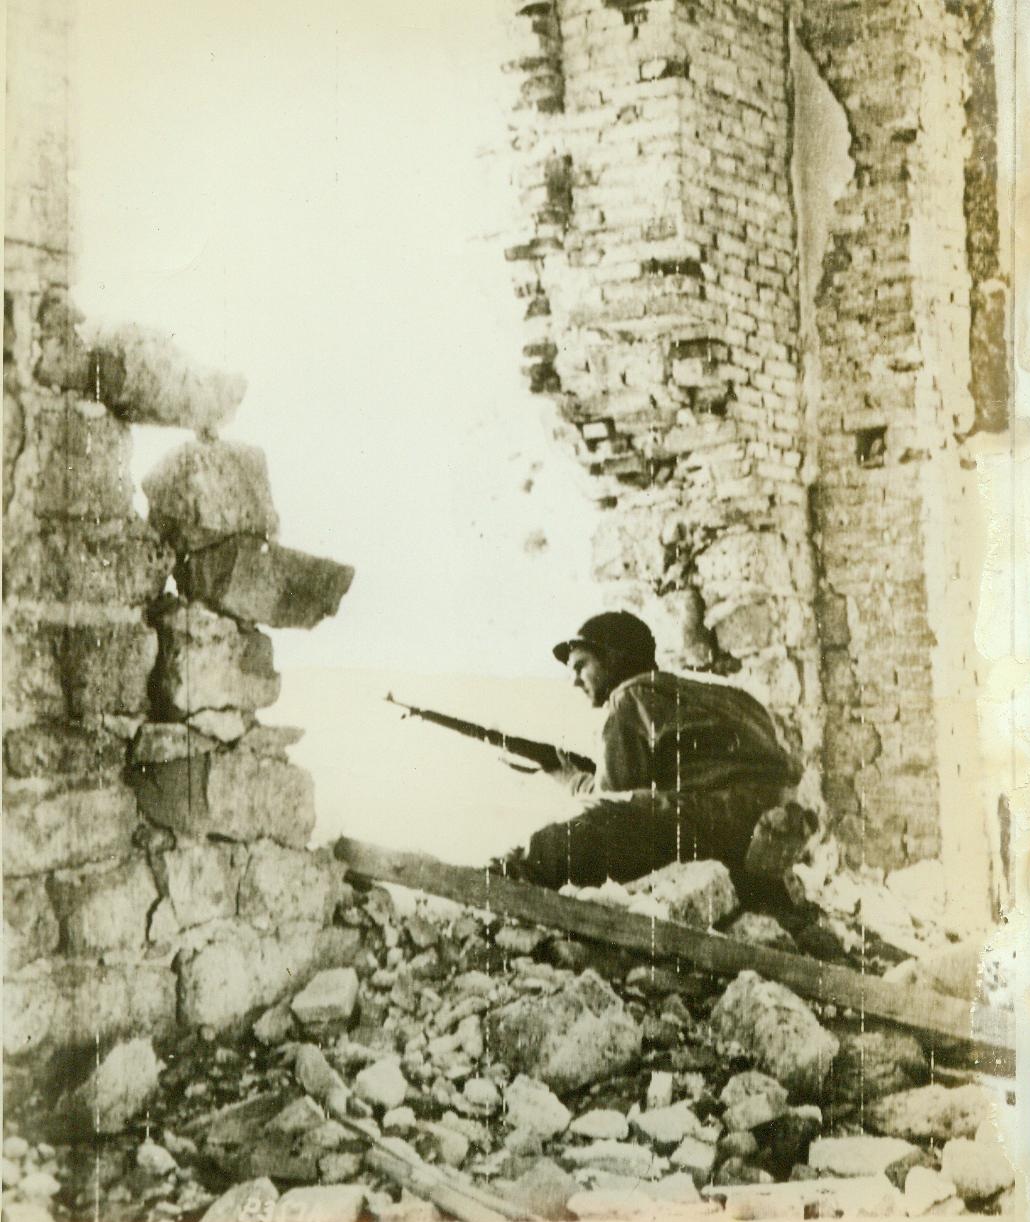 Looking for snipers, 1/11/1944. SAN VITTORE, ITALY – An American soldier peers carefully through a breach in a wall of a blasted building in San Vittore, keeping a sharp watch for German snipers remaining in the town after it was occupied by the Allies. This photo was flashed to the U.S. by radiotelephoto. CREDIT LINE (ACME ) 1-11-44;